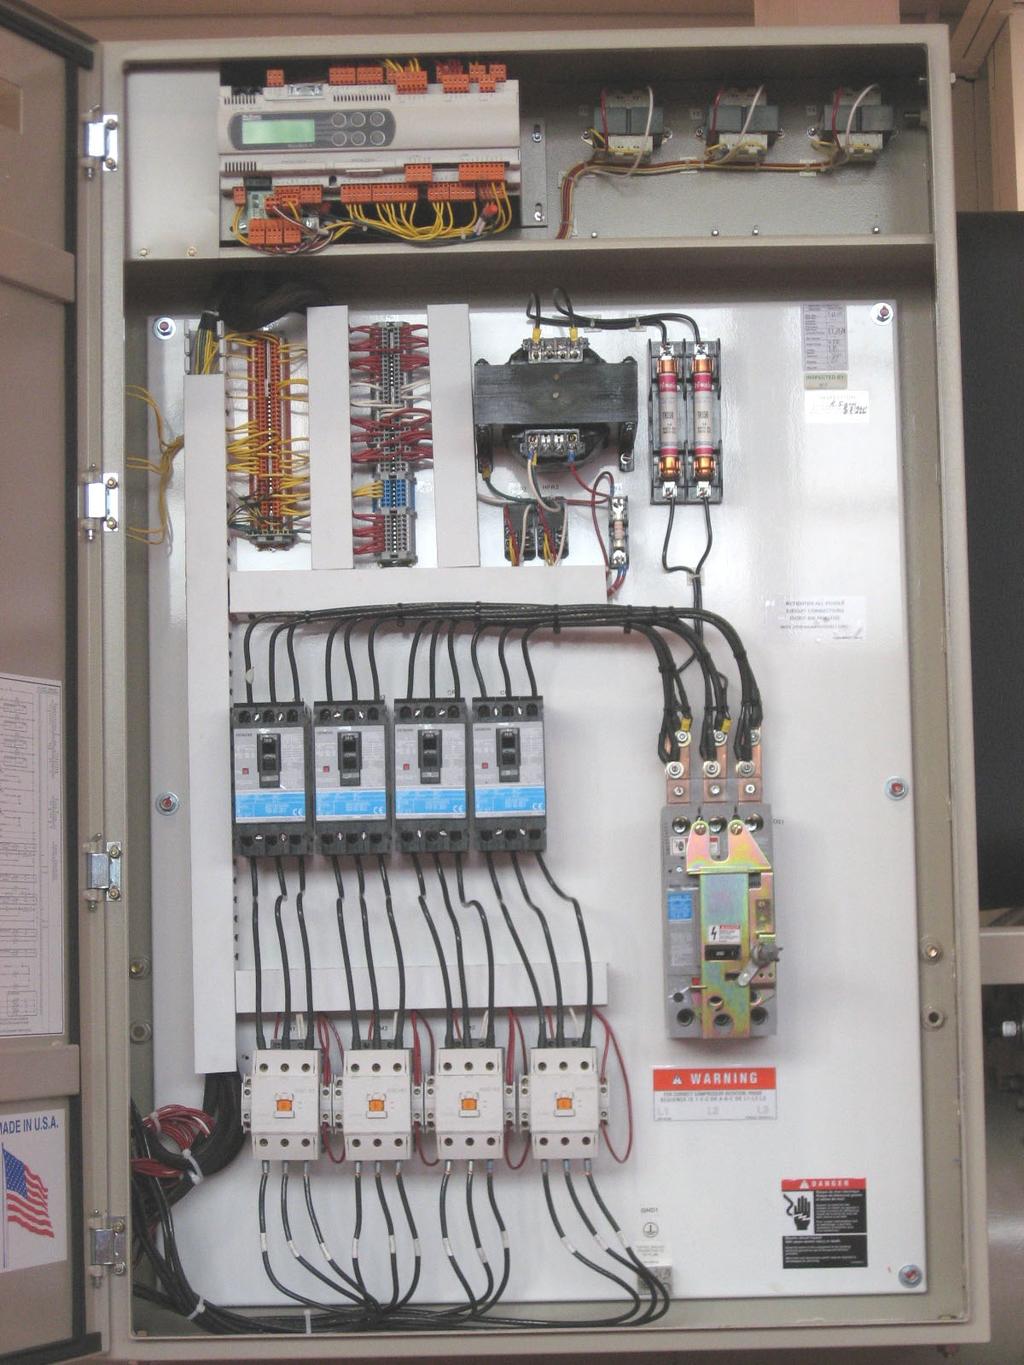 Control Panel Layout Table 2, Typical Control Panel, 4-Compressor Unit Microtech Controller (2) Circuit Mechanical Hi-Pressure Switch Relays (4) Compressor Circuit Breakers (3) 120V/24V Transformers